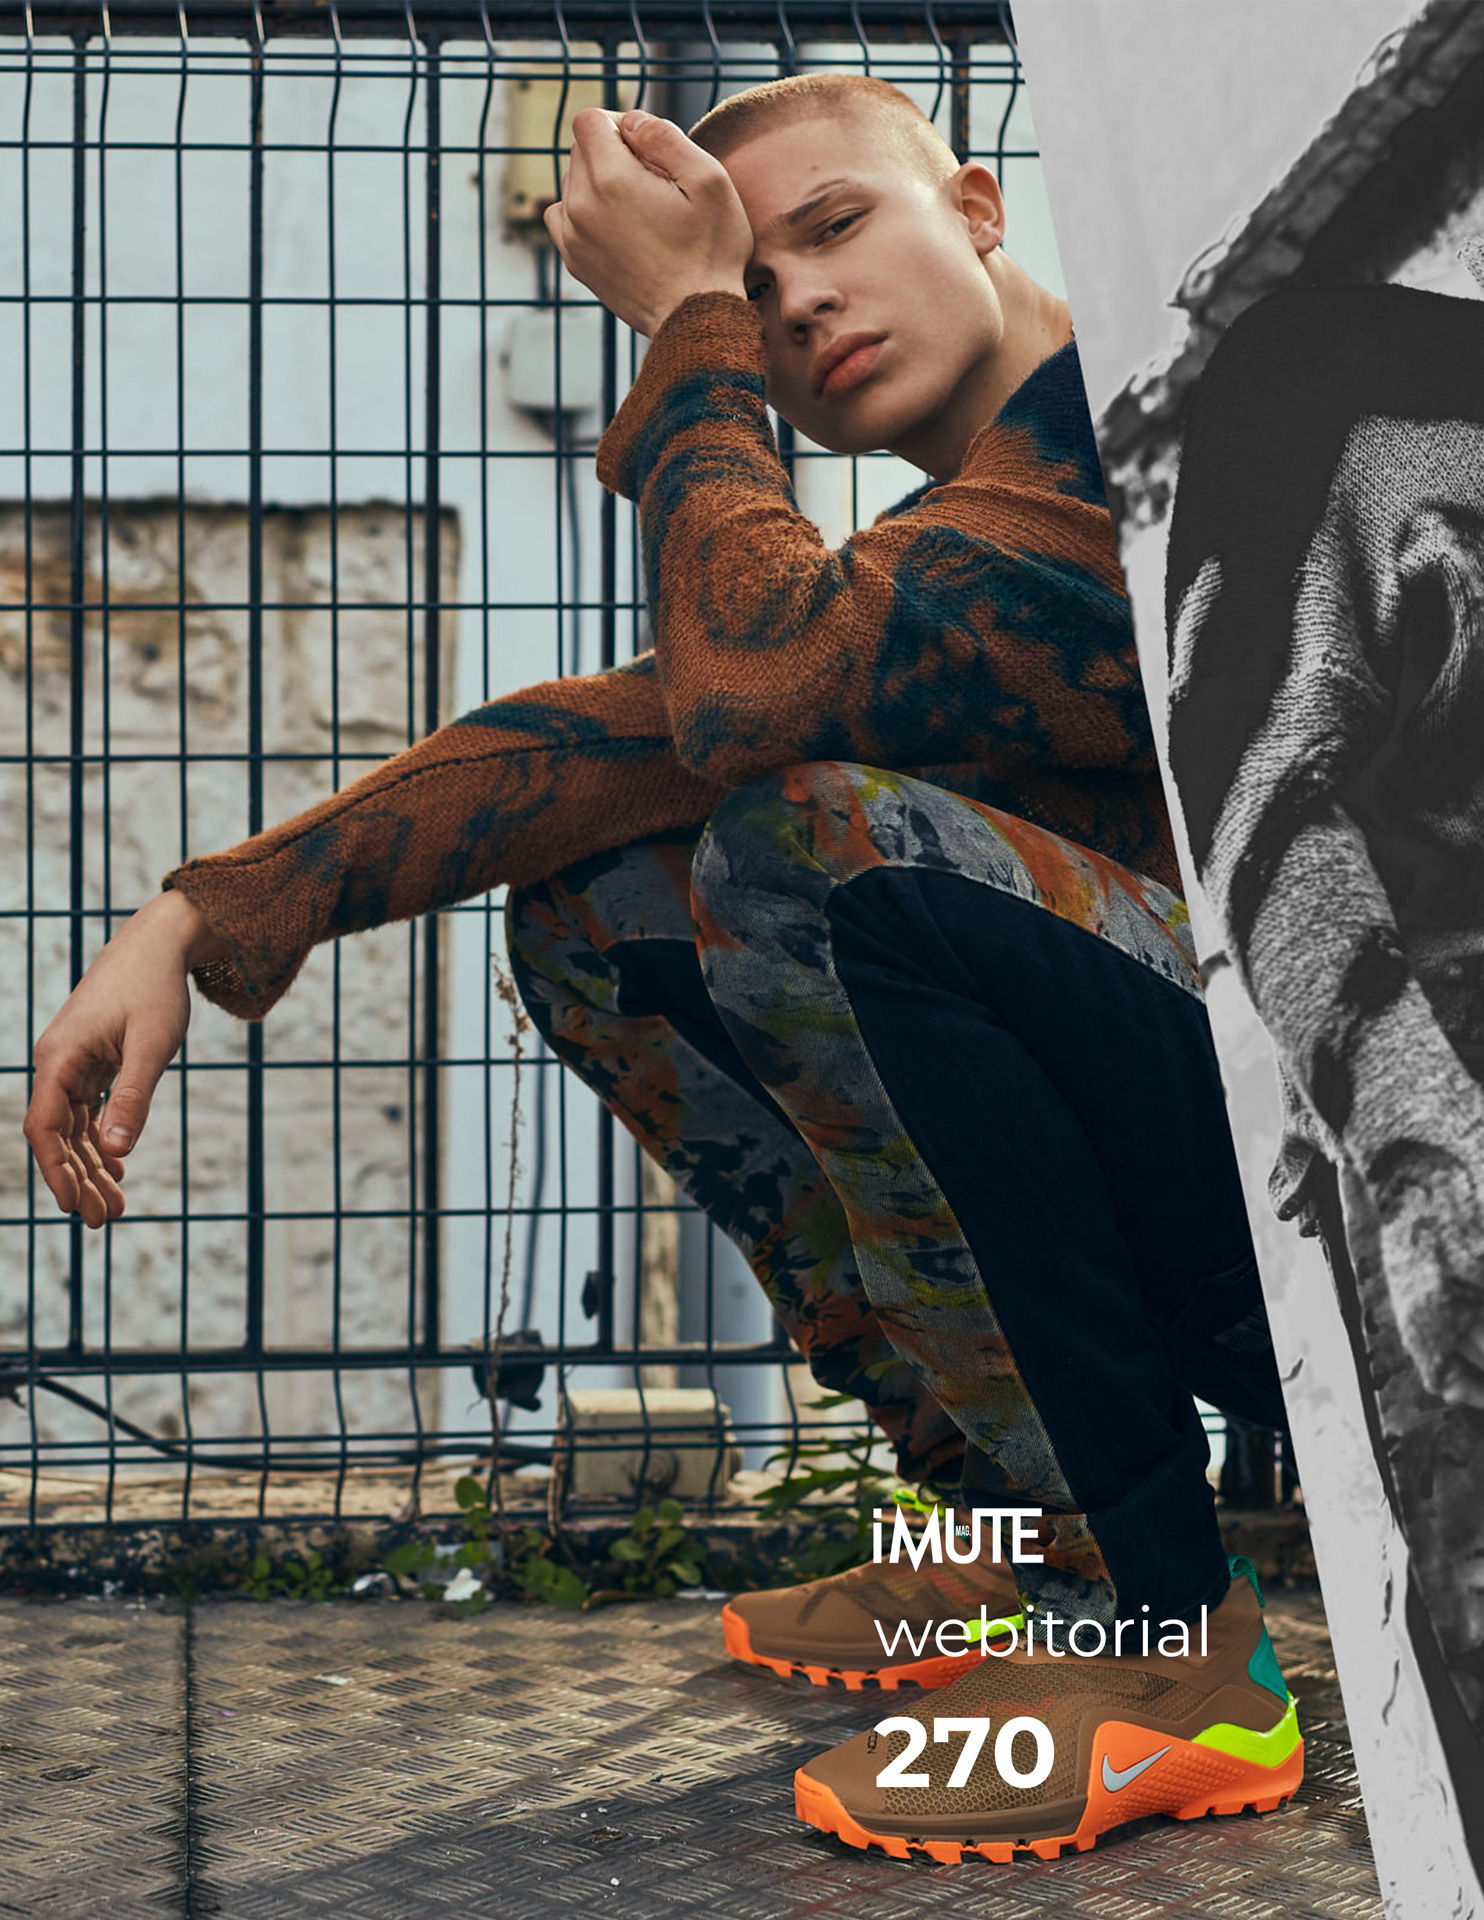 The TRACKER webitorial for iMute Magazine PHOTOGRAPHER | PIERRE TURTAUT MODEL | PAAVO ROCCO @ M4 MODELS STYLIST | ANGIE GRENIER